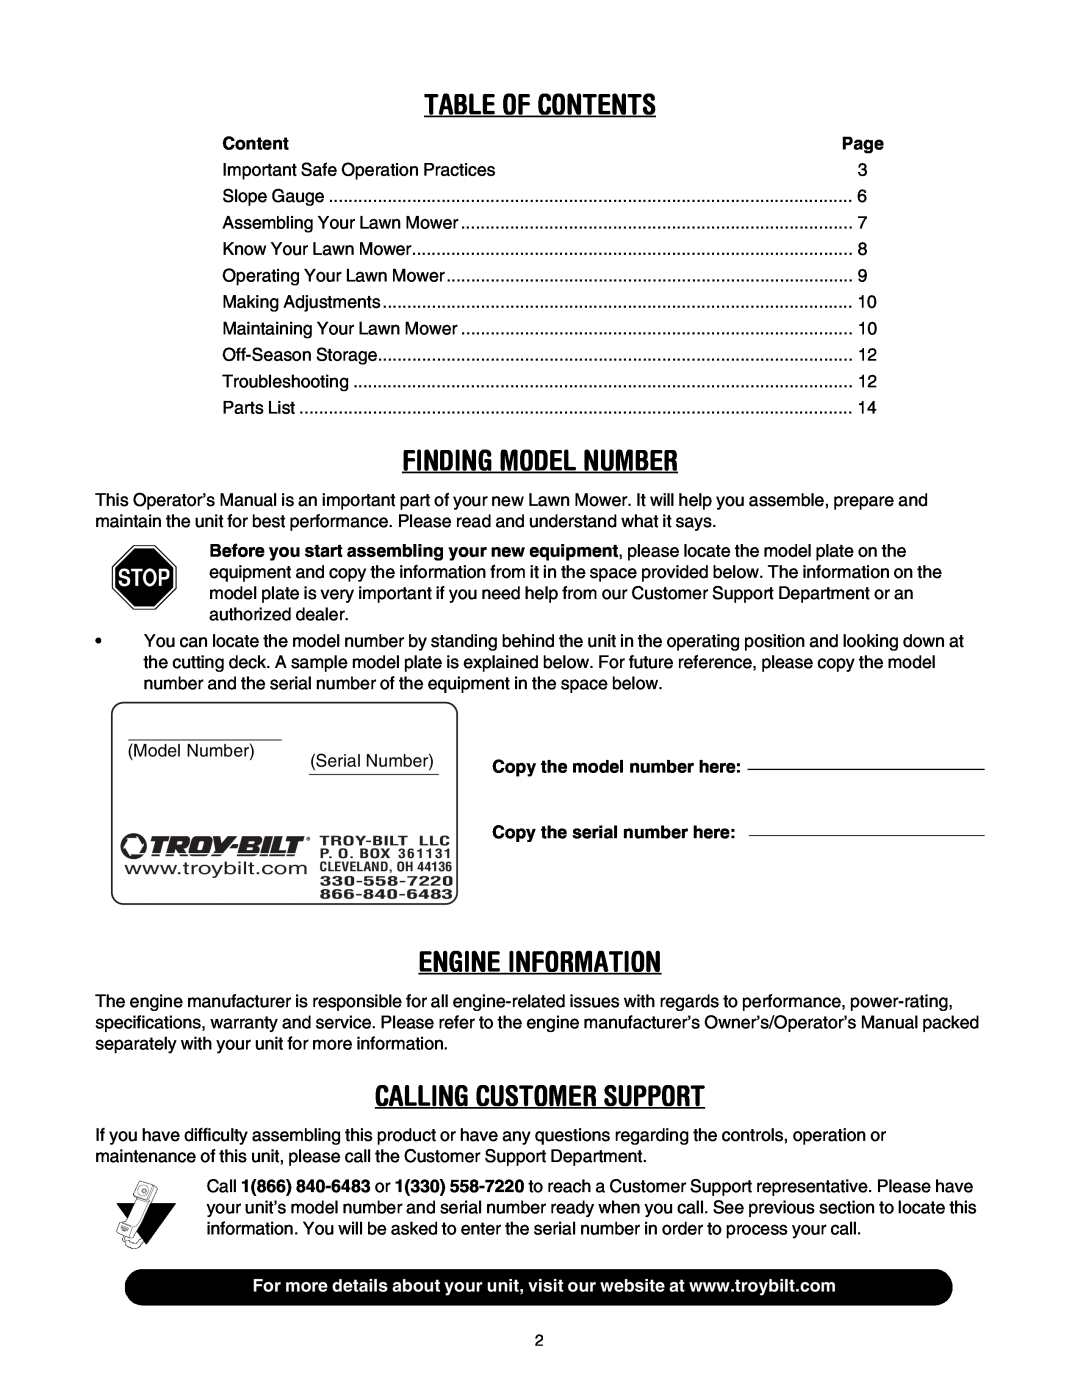 Troy-Bilt TRU CUT 100 manual Table Of Contents, Finding Model Number, Engine Information, Calling Customer Support 